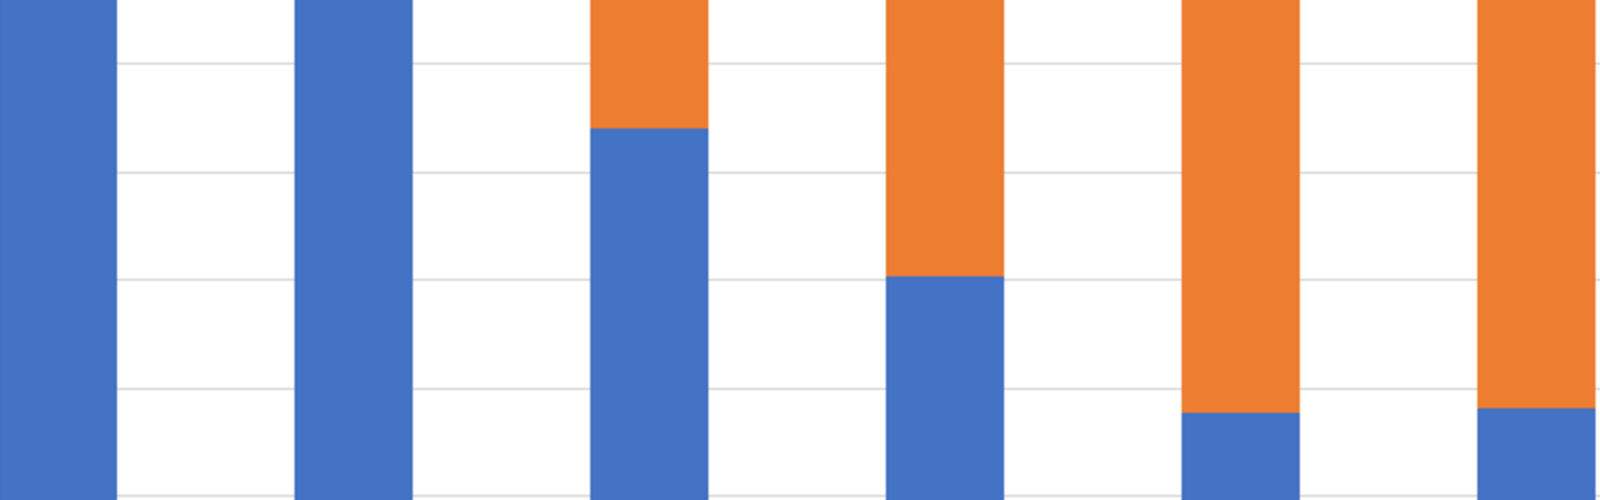 A close up of a graph with blue and orange bars